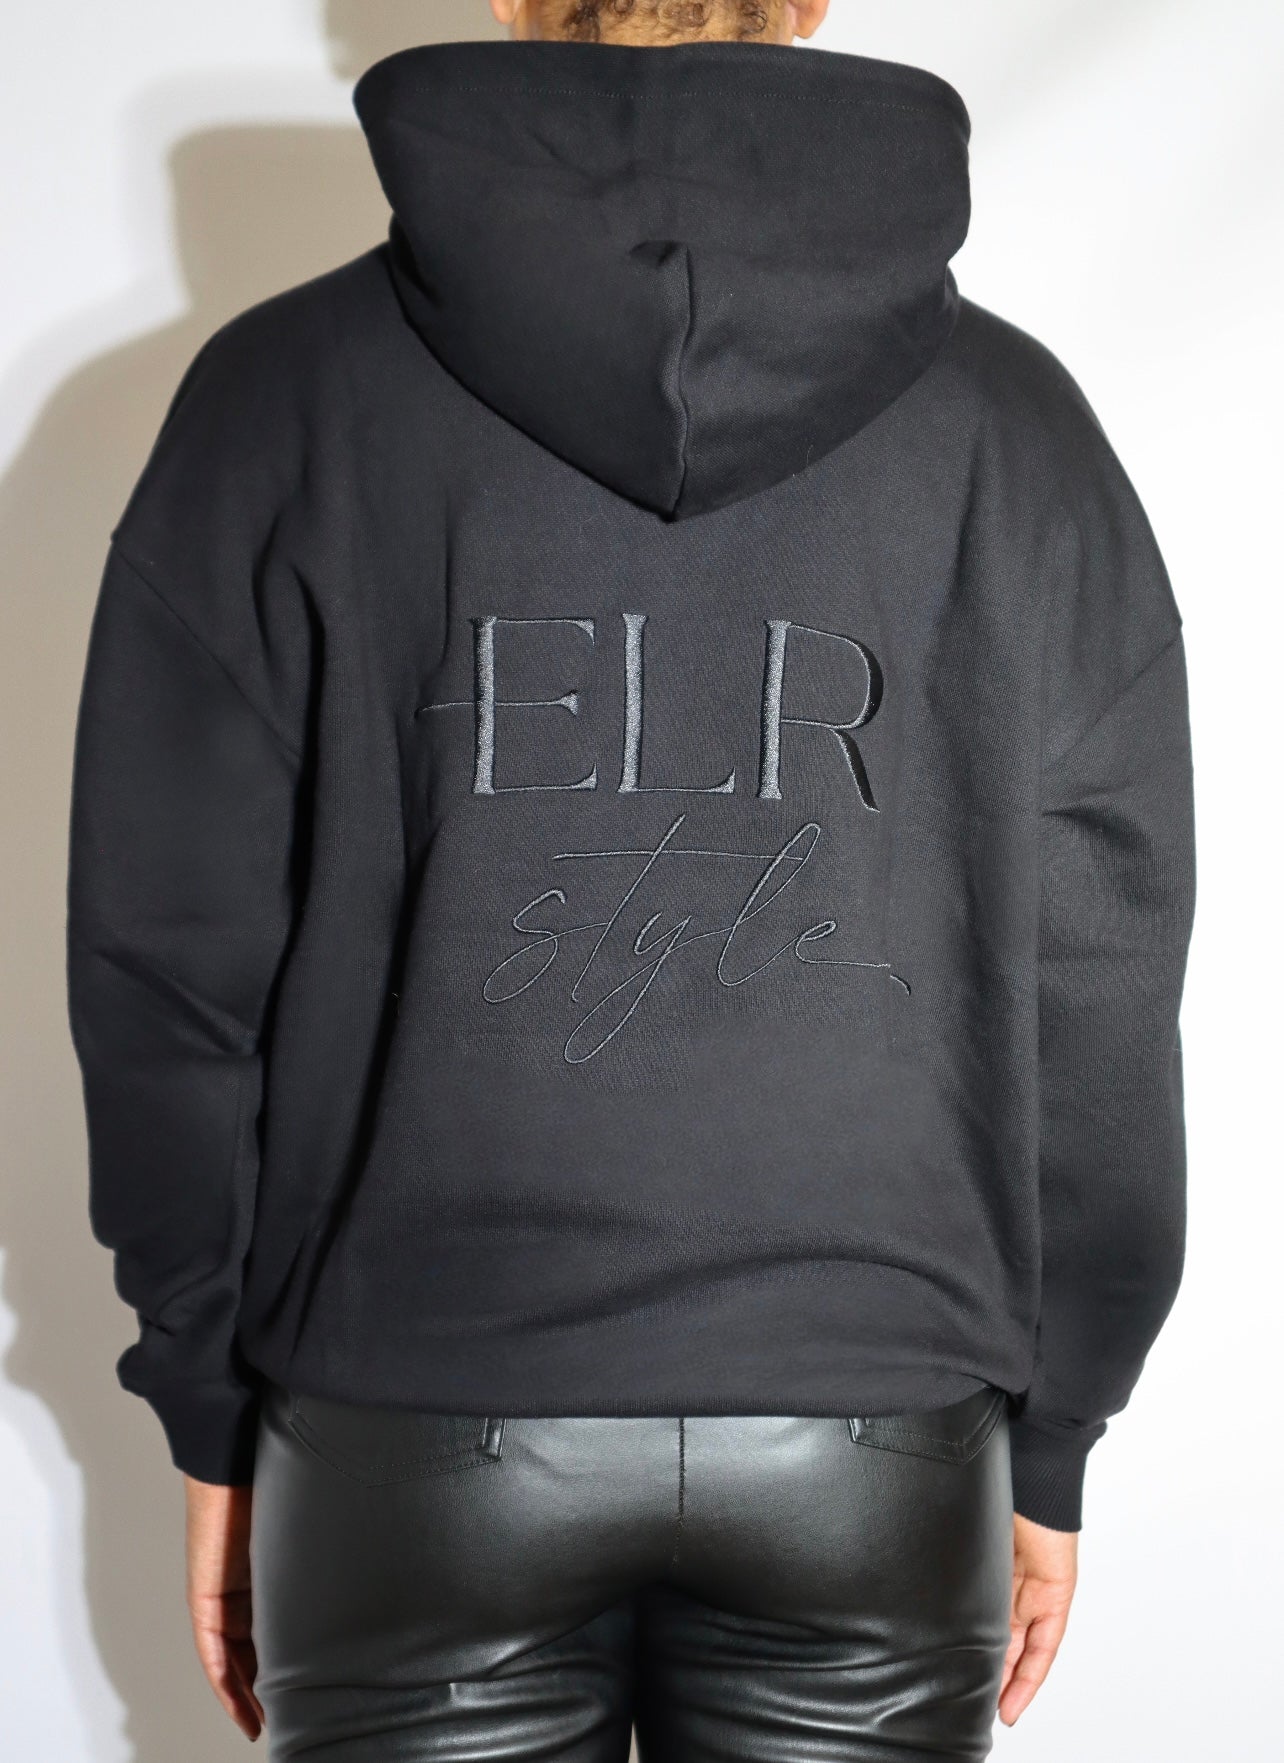 THE ELR OVERSIZED HOODIE